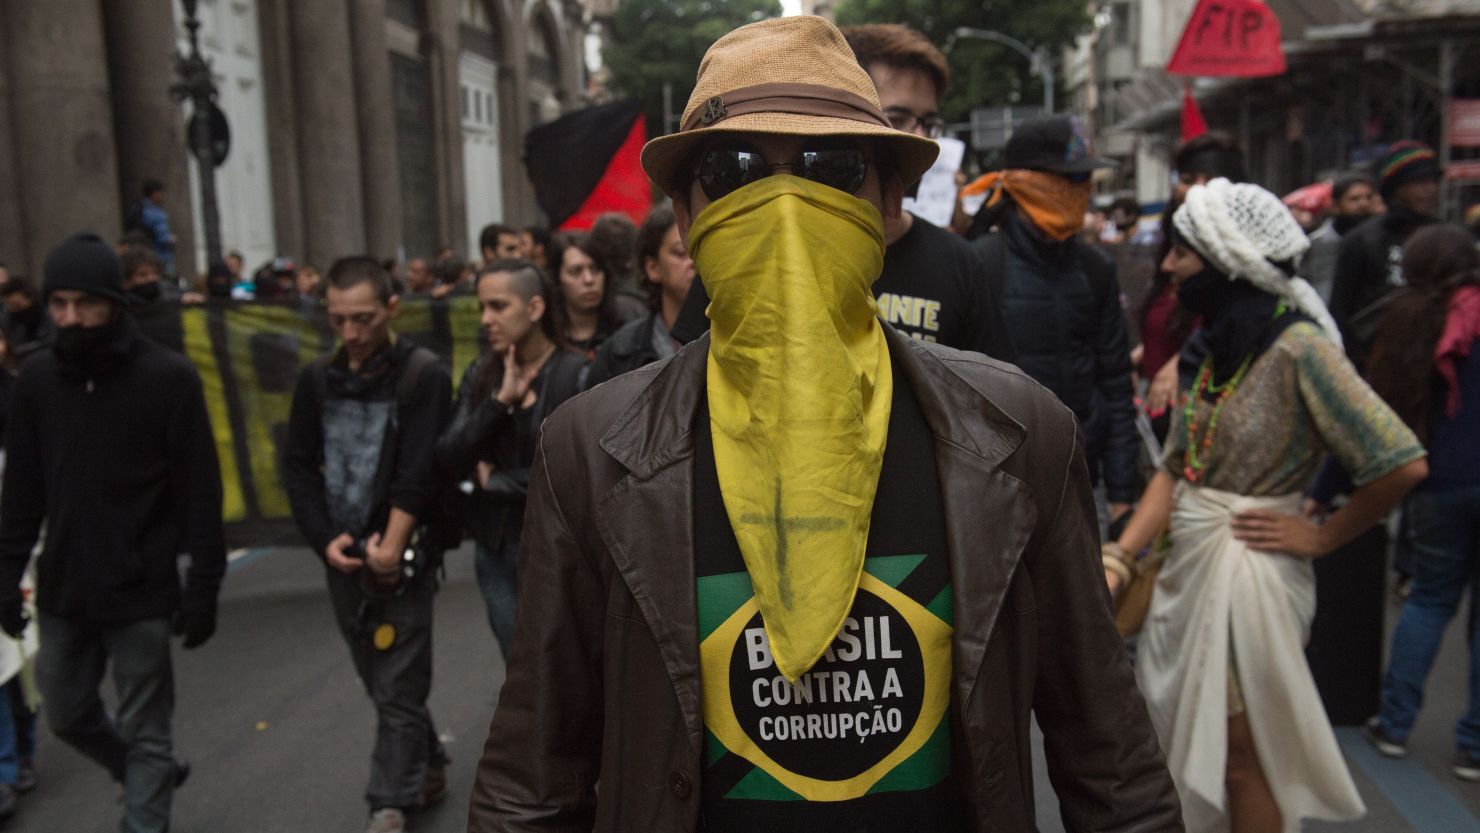 Brazil has witnessed a number of anti-government demonstrations this year.